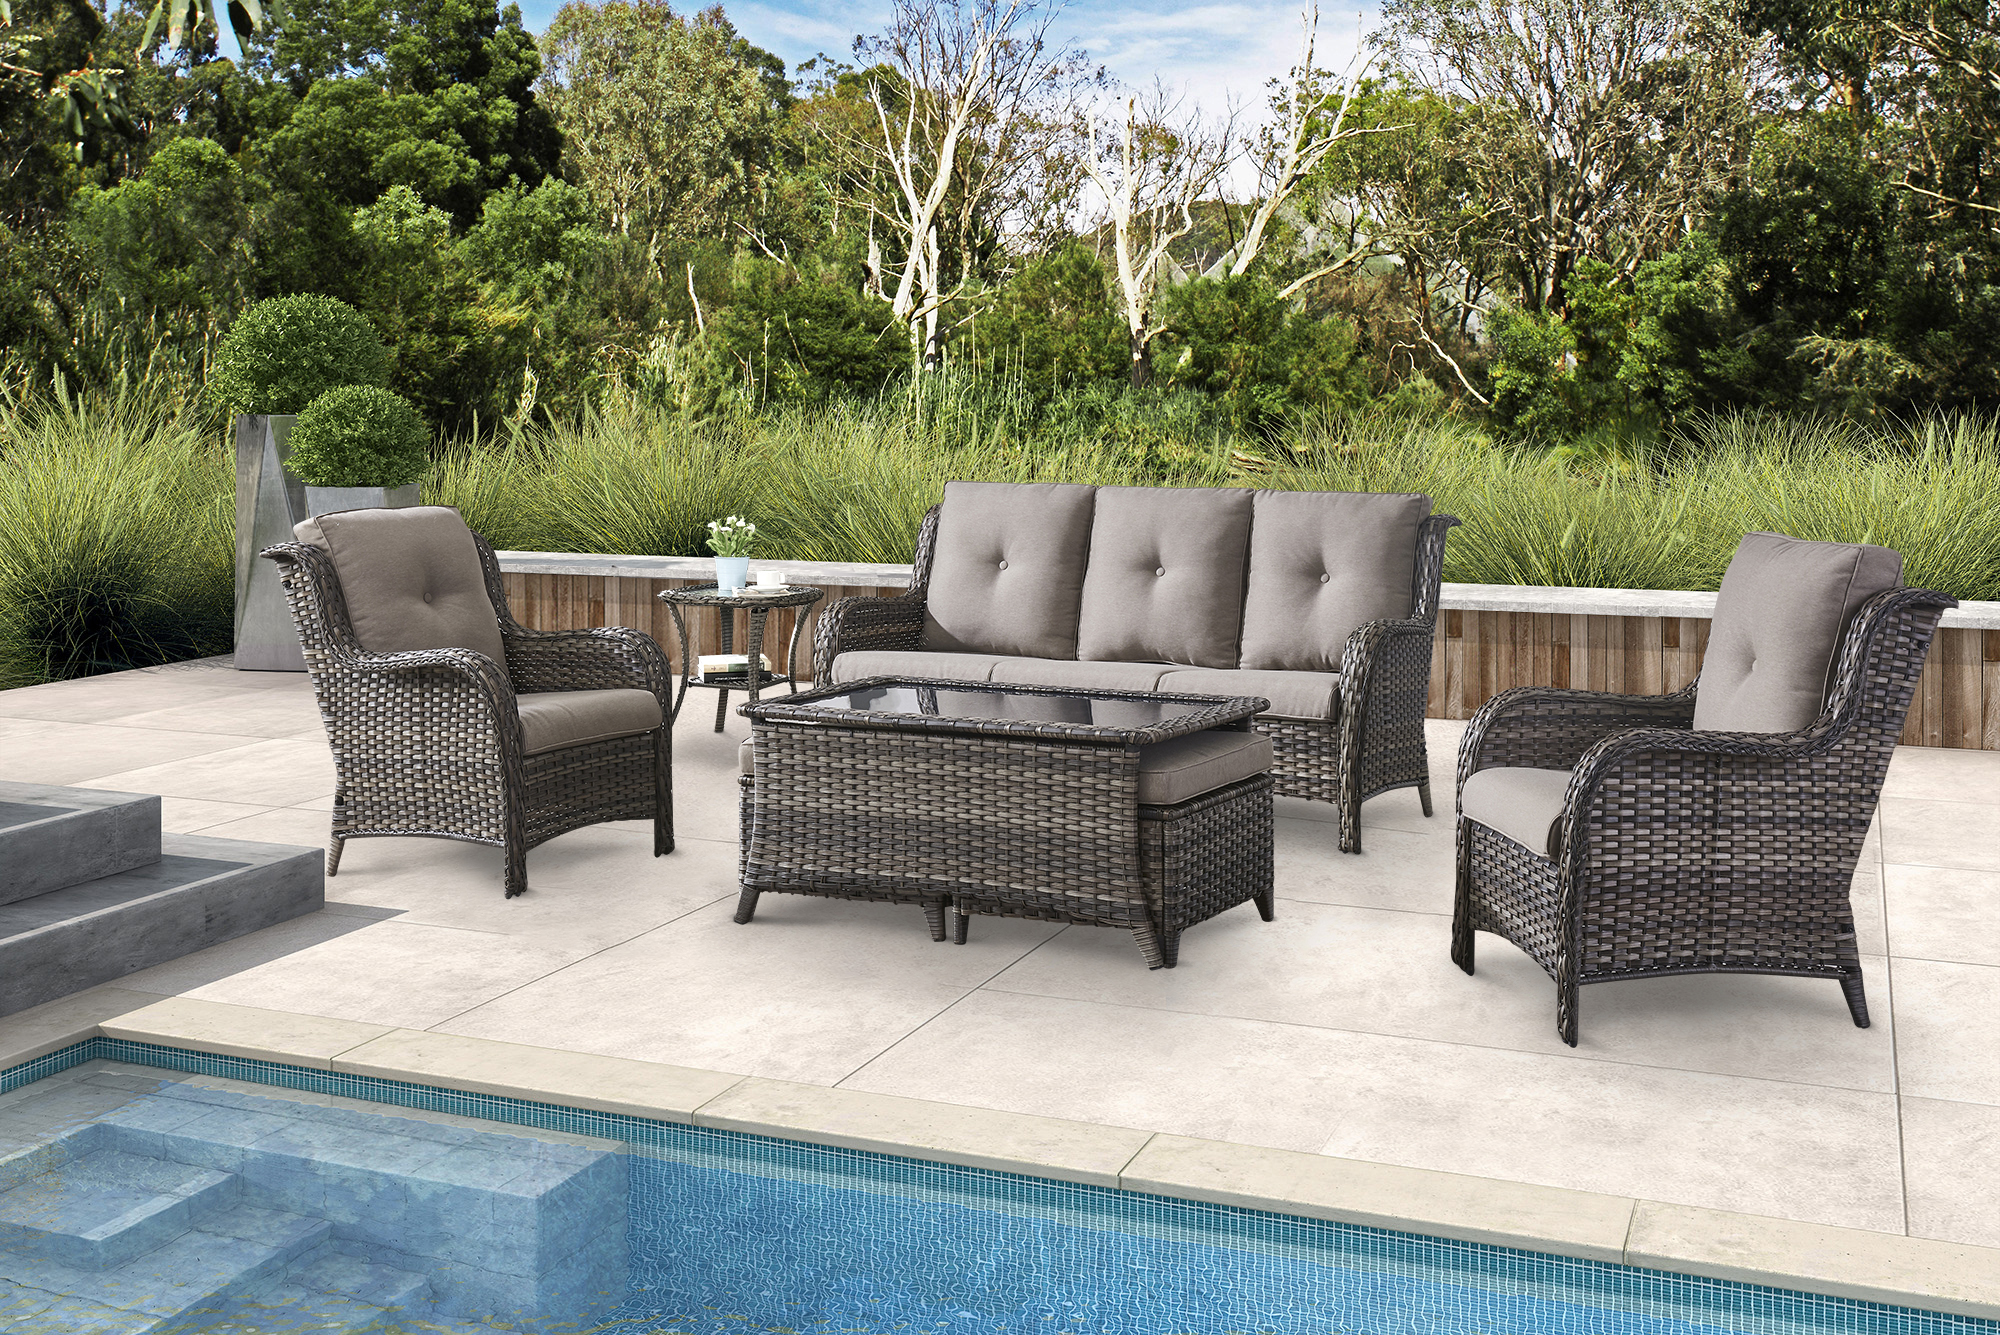 PARKWELL 7Pcs Outdoor Wicker Rattan Conversation Patio Furniture Set, including Three-seater Sofa, Chairs, Coffee Table, Ottomans and Side Table with Cushion, Gray - image 1 of 9